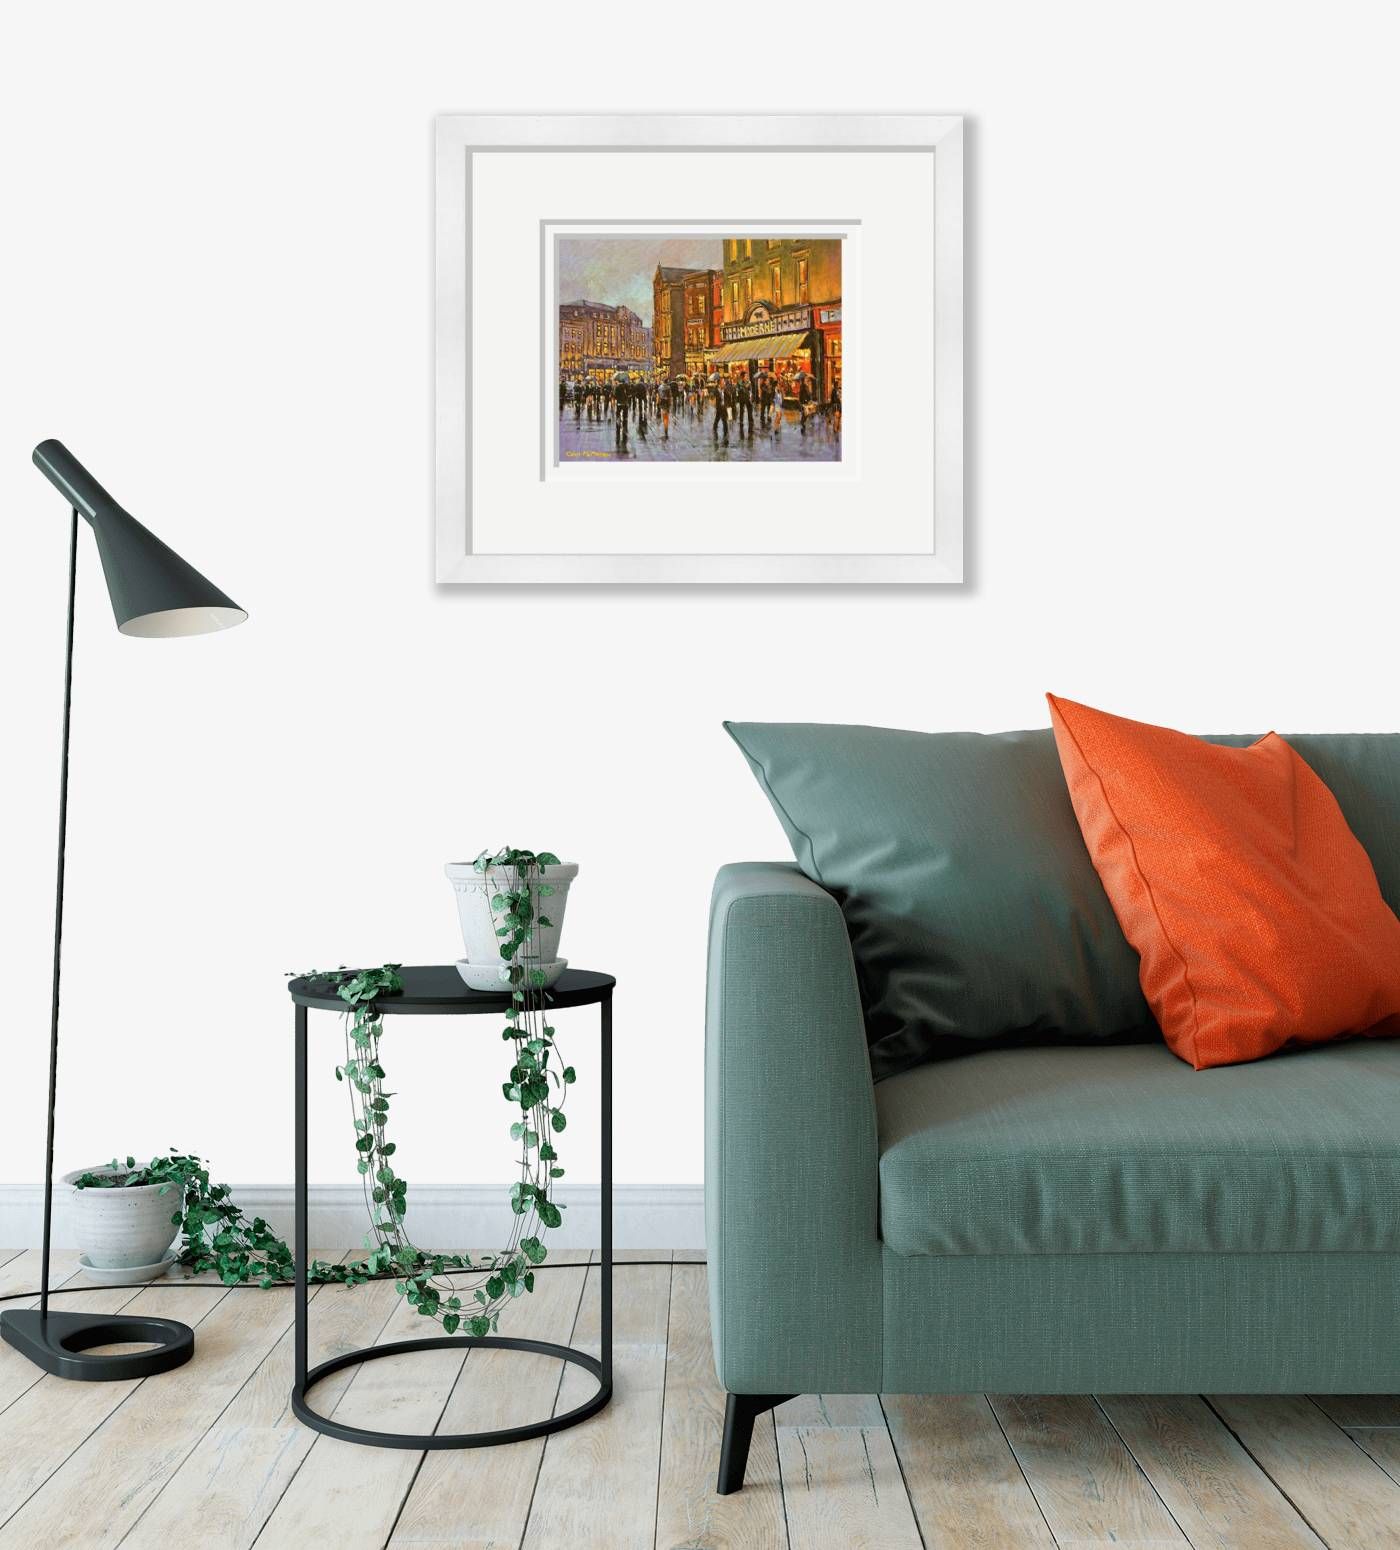 Large framed - The Moderne, Cork - 216 by Chris McMorrow